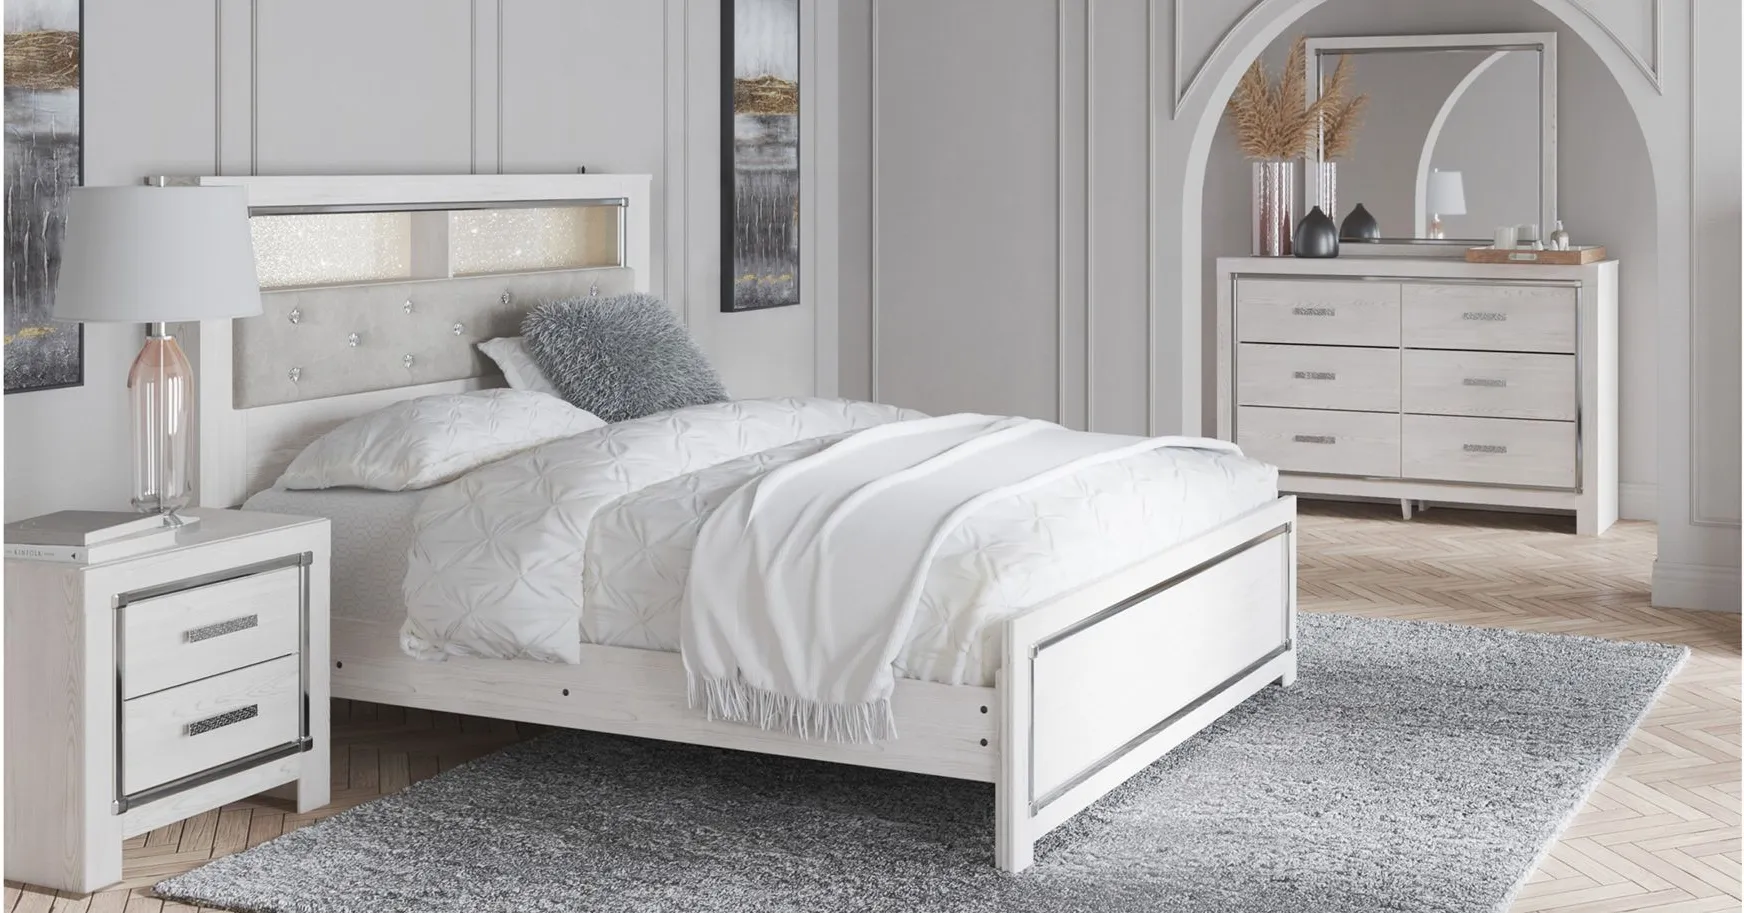 Tanya 4-pc. Bedroom Set in White by Ashley Furniture